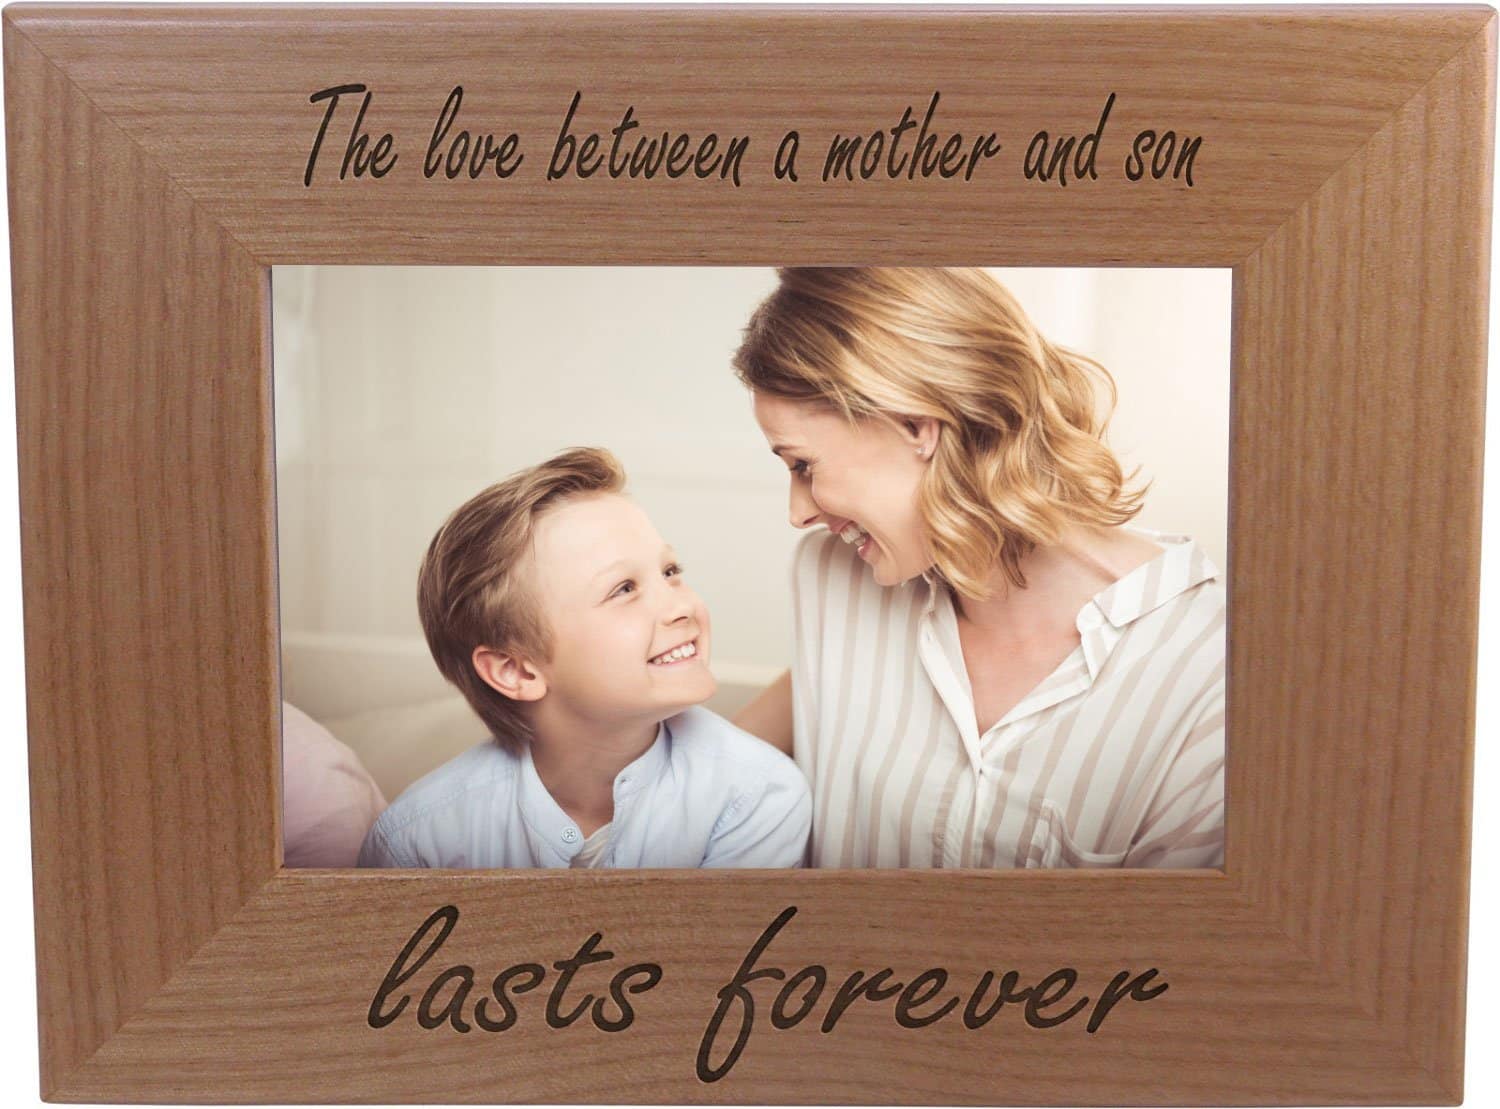 Unique Gifts for Son 2022: Son Frame from Mom 2022